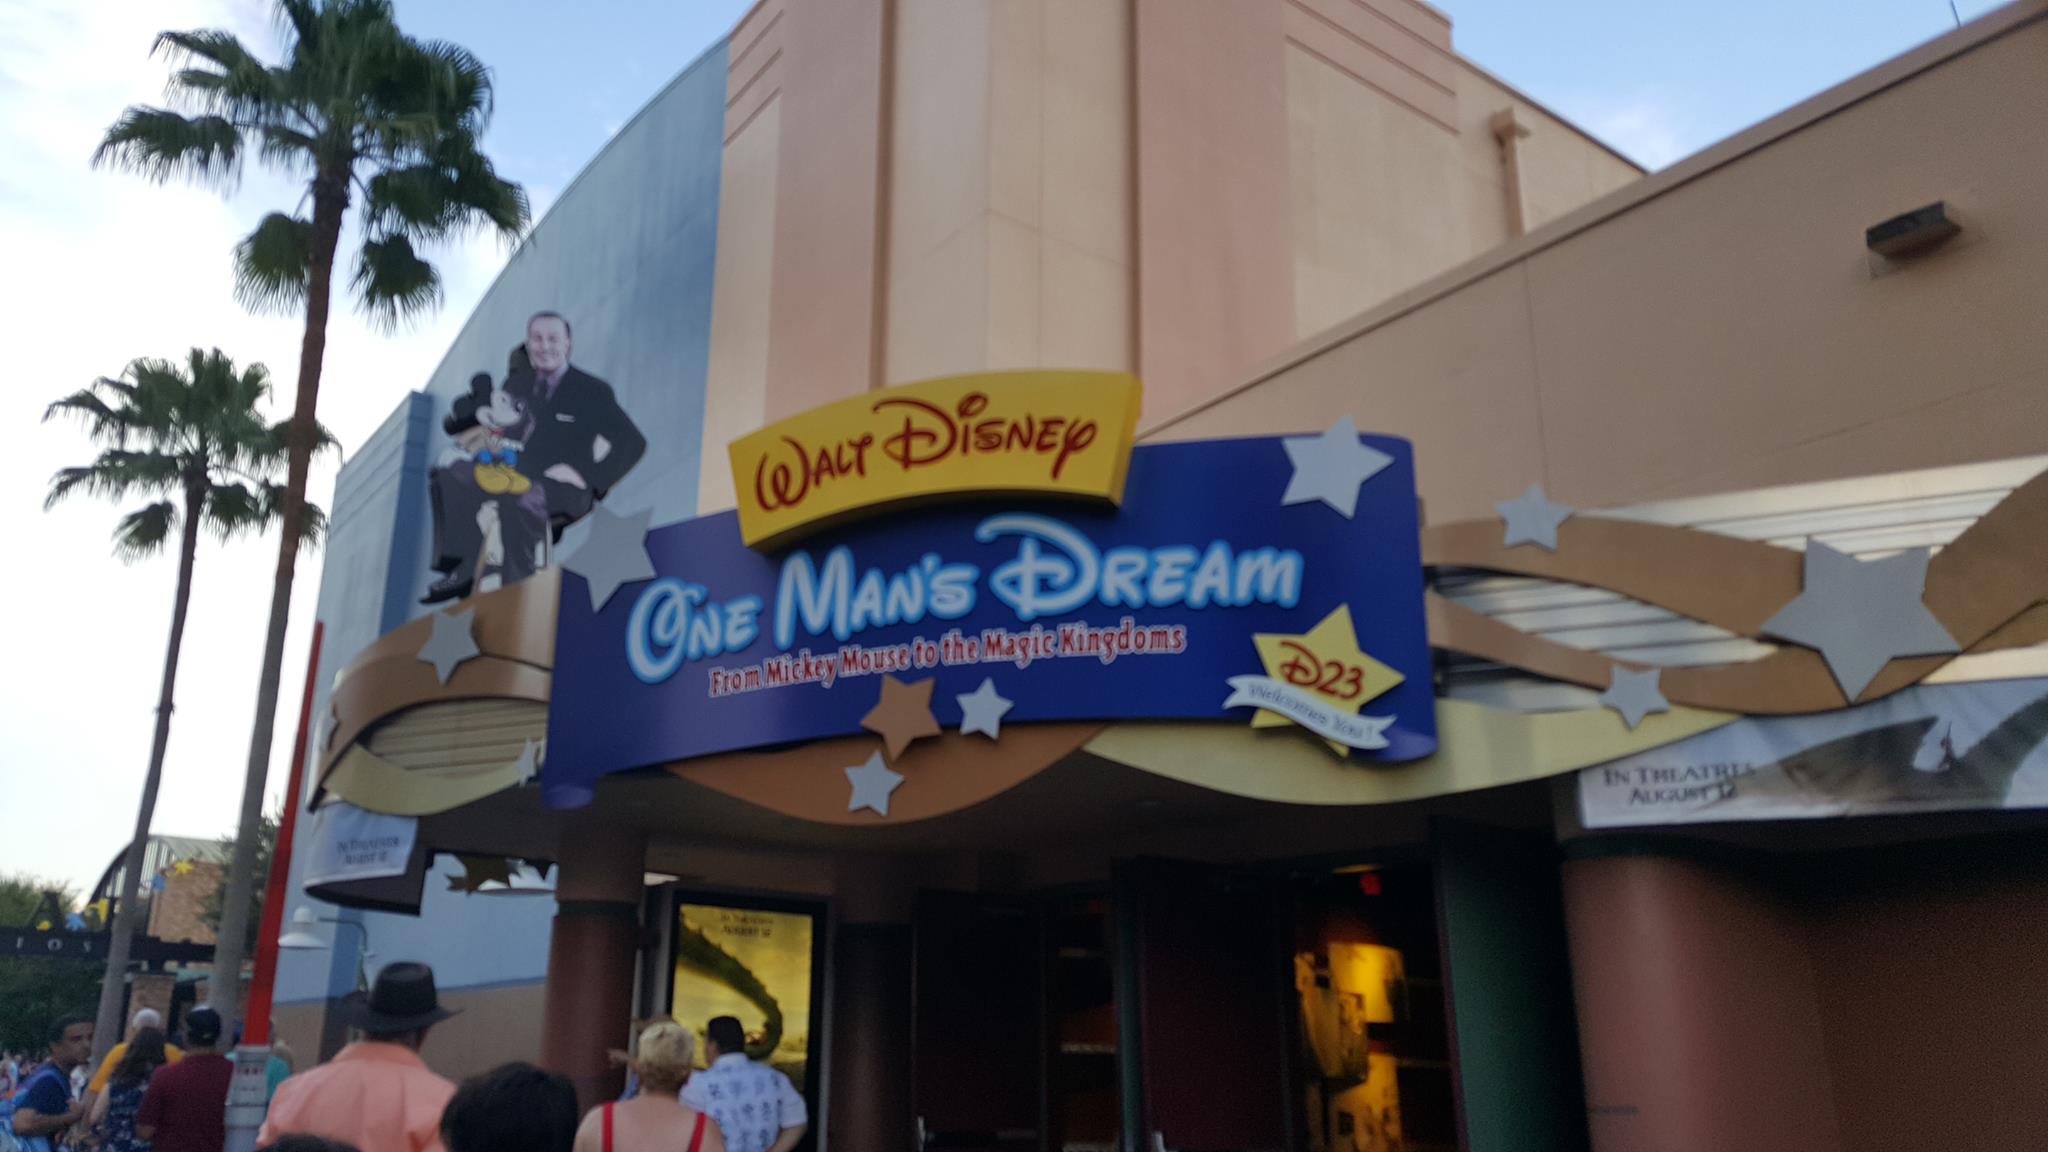 Dr. Strange preview being shown at Hollywood Studios “One Man’s Dream” Attraction